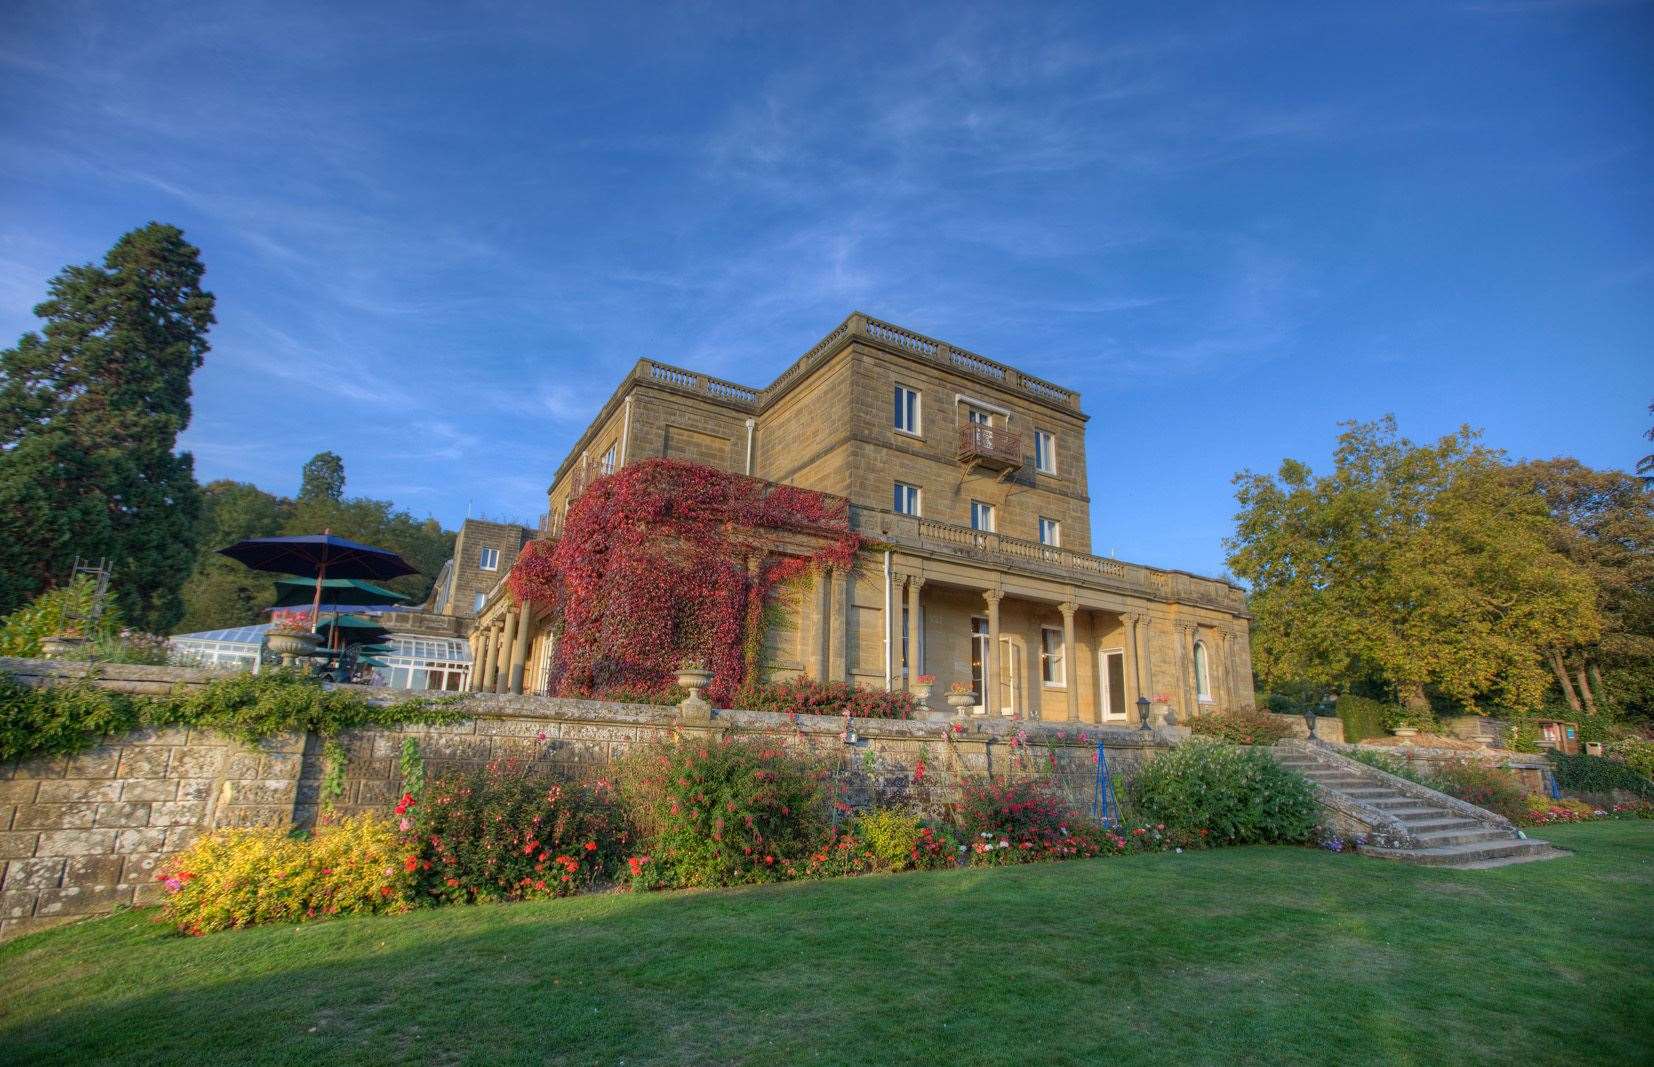 Luxury hotel Salomons Estate is set to become the UK's first care hotel to help the NHS